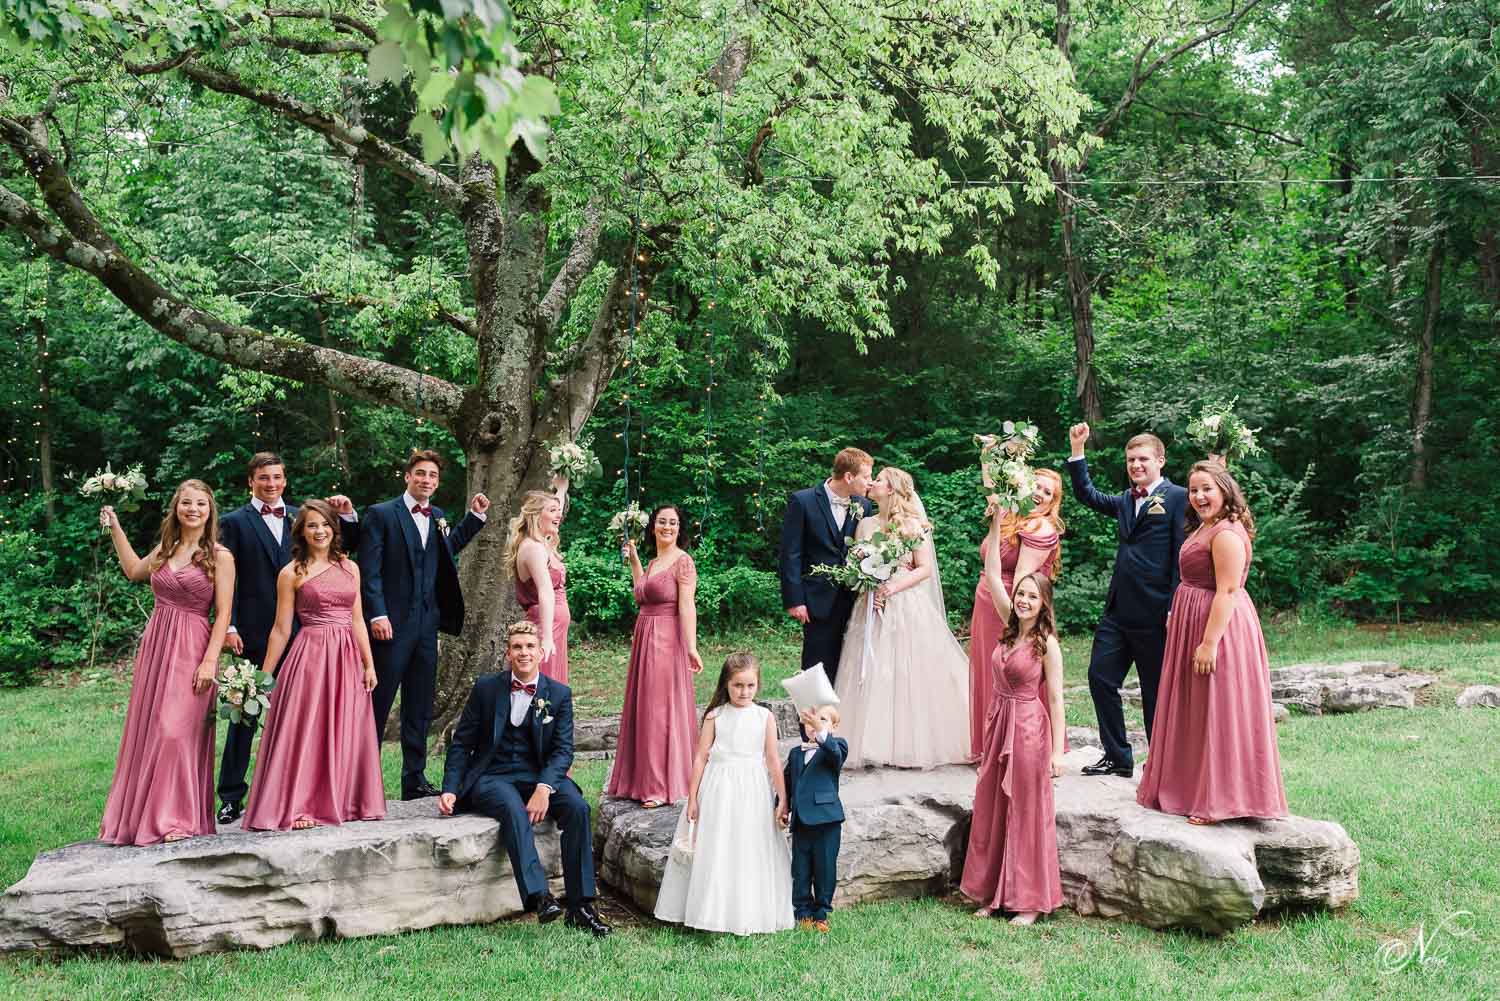 full wedding party standing outside on rocks with greenery in the background at the venue Chattanooga before the wedding ceremony.